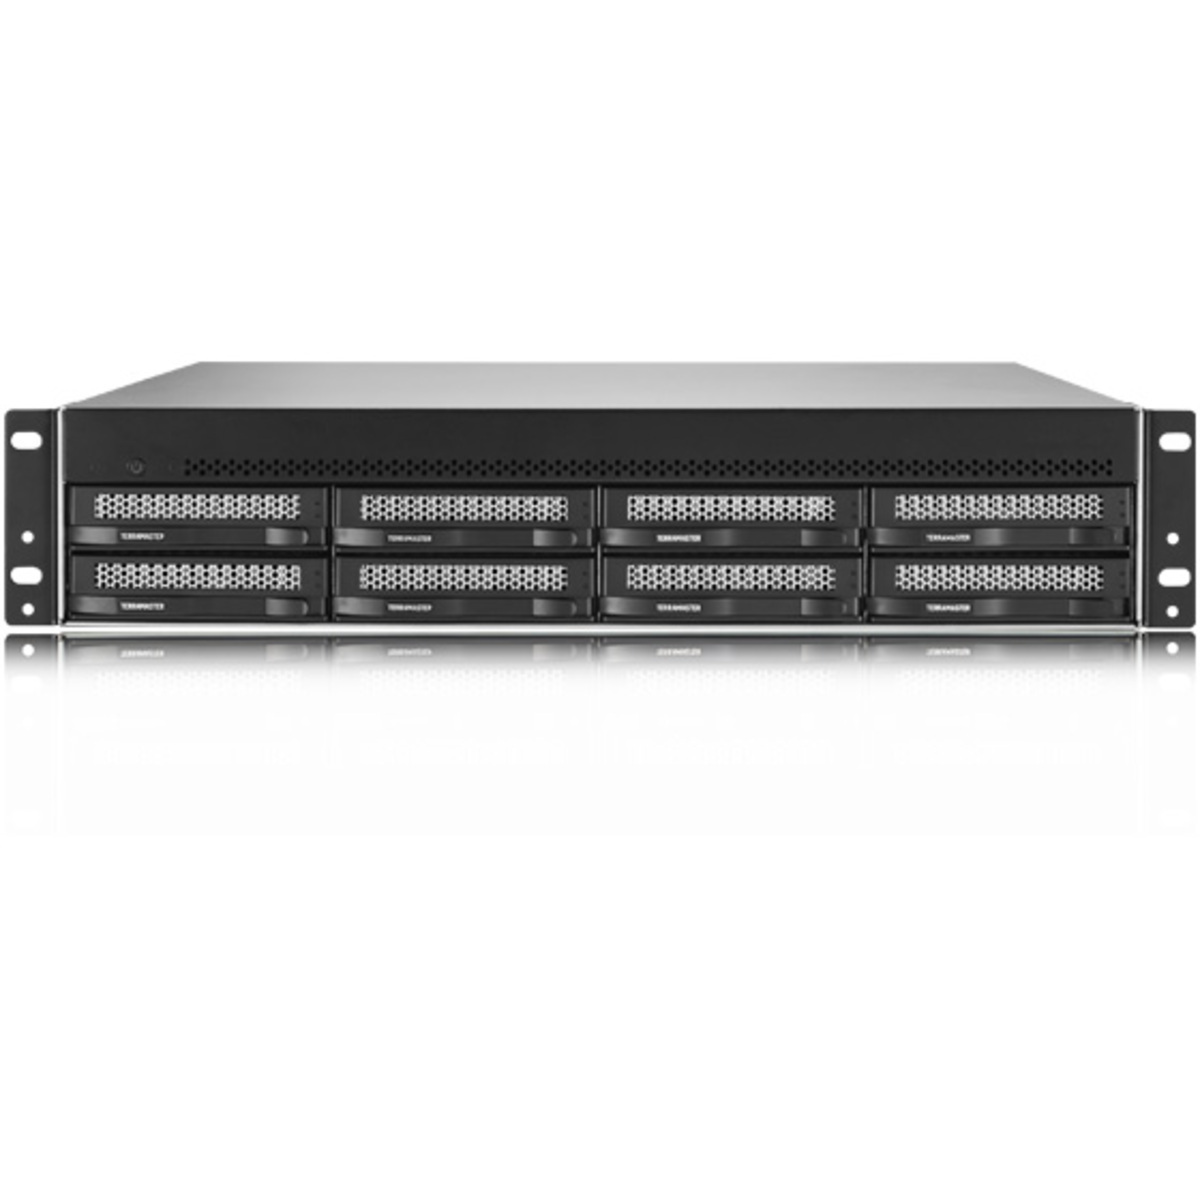 TerraMaster U8-450 4tb 8-Bay RackMount Multimedia / Power User / Business NAS - Network Attached Storage Device 4x1tb Crucial MX500 CT1000MX500SSD1 2.5 560/510MB/s SATA 6Gb/s SSD CONSUMER Class Drives Installed - Burn-In Tested U8-450